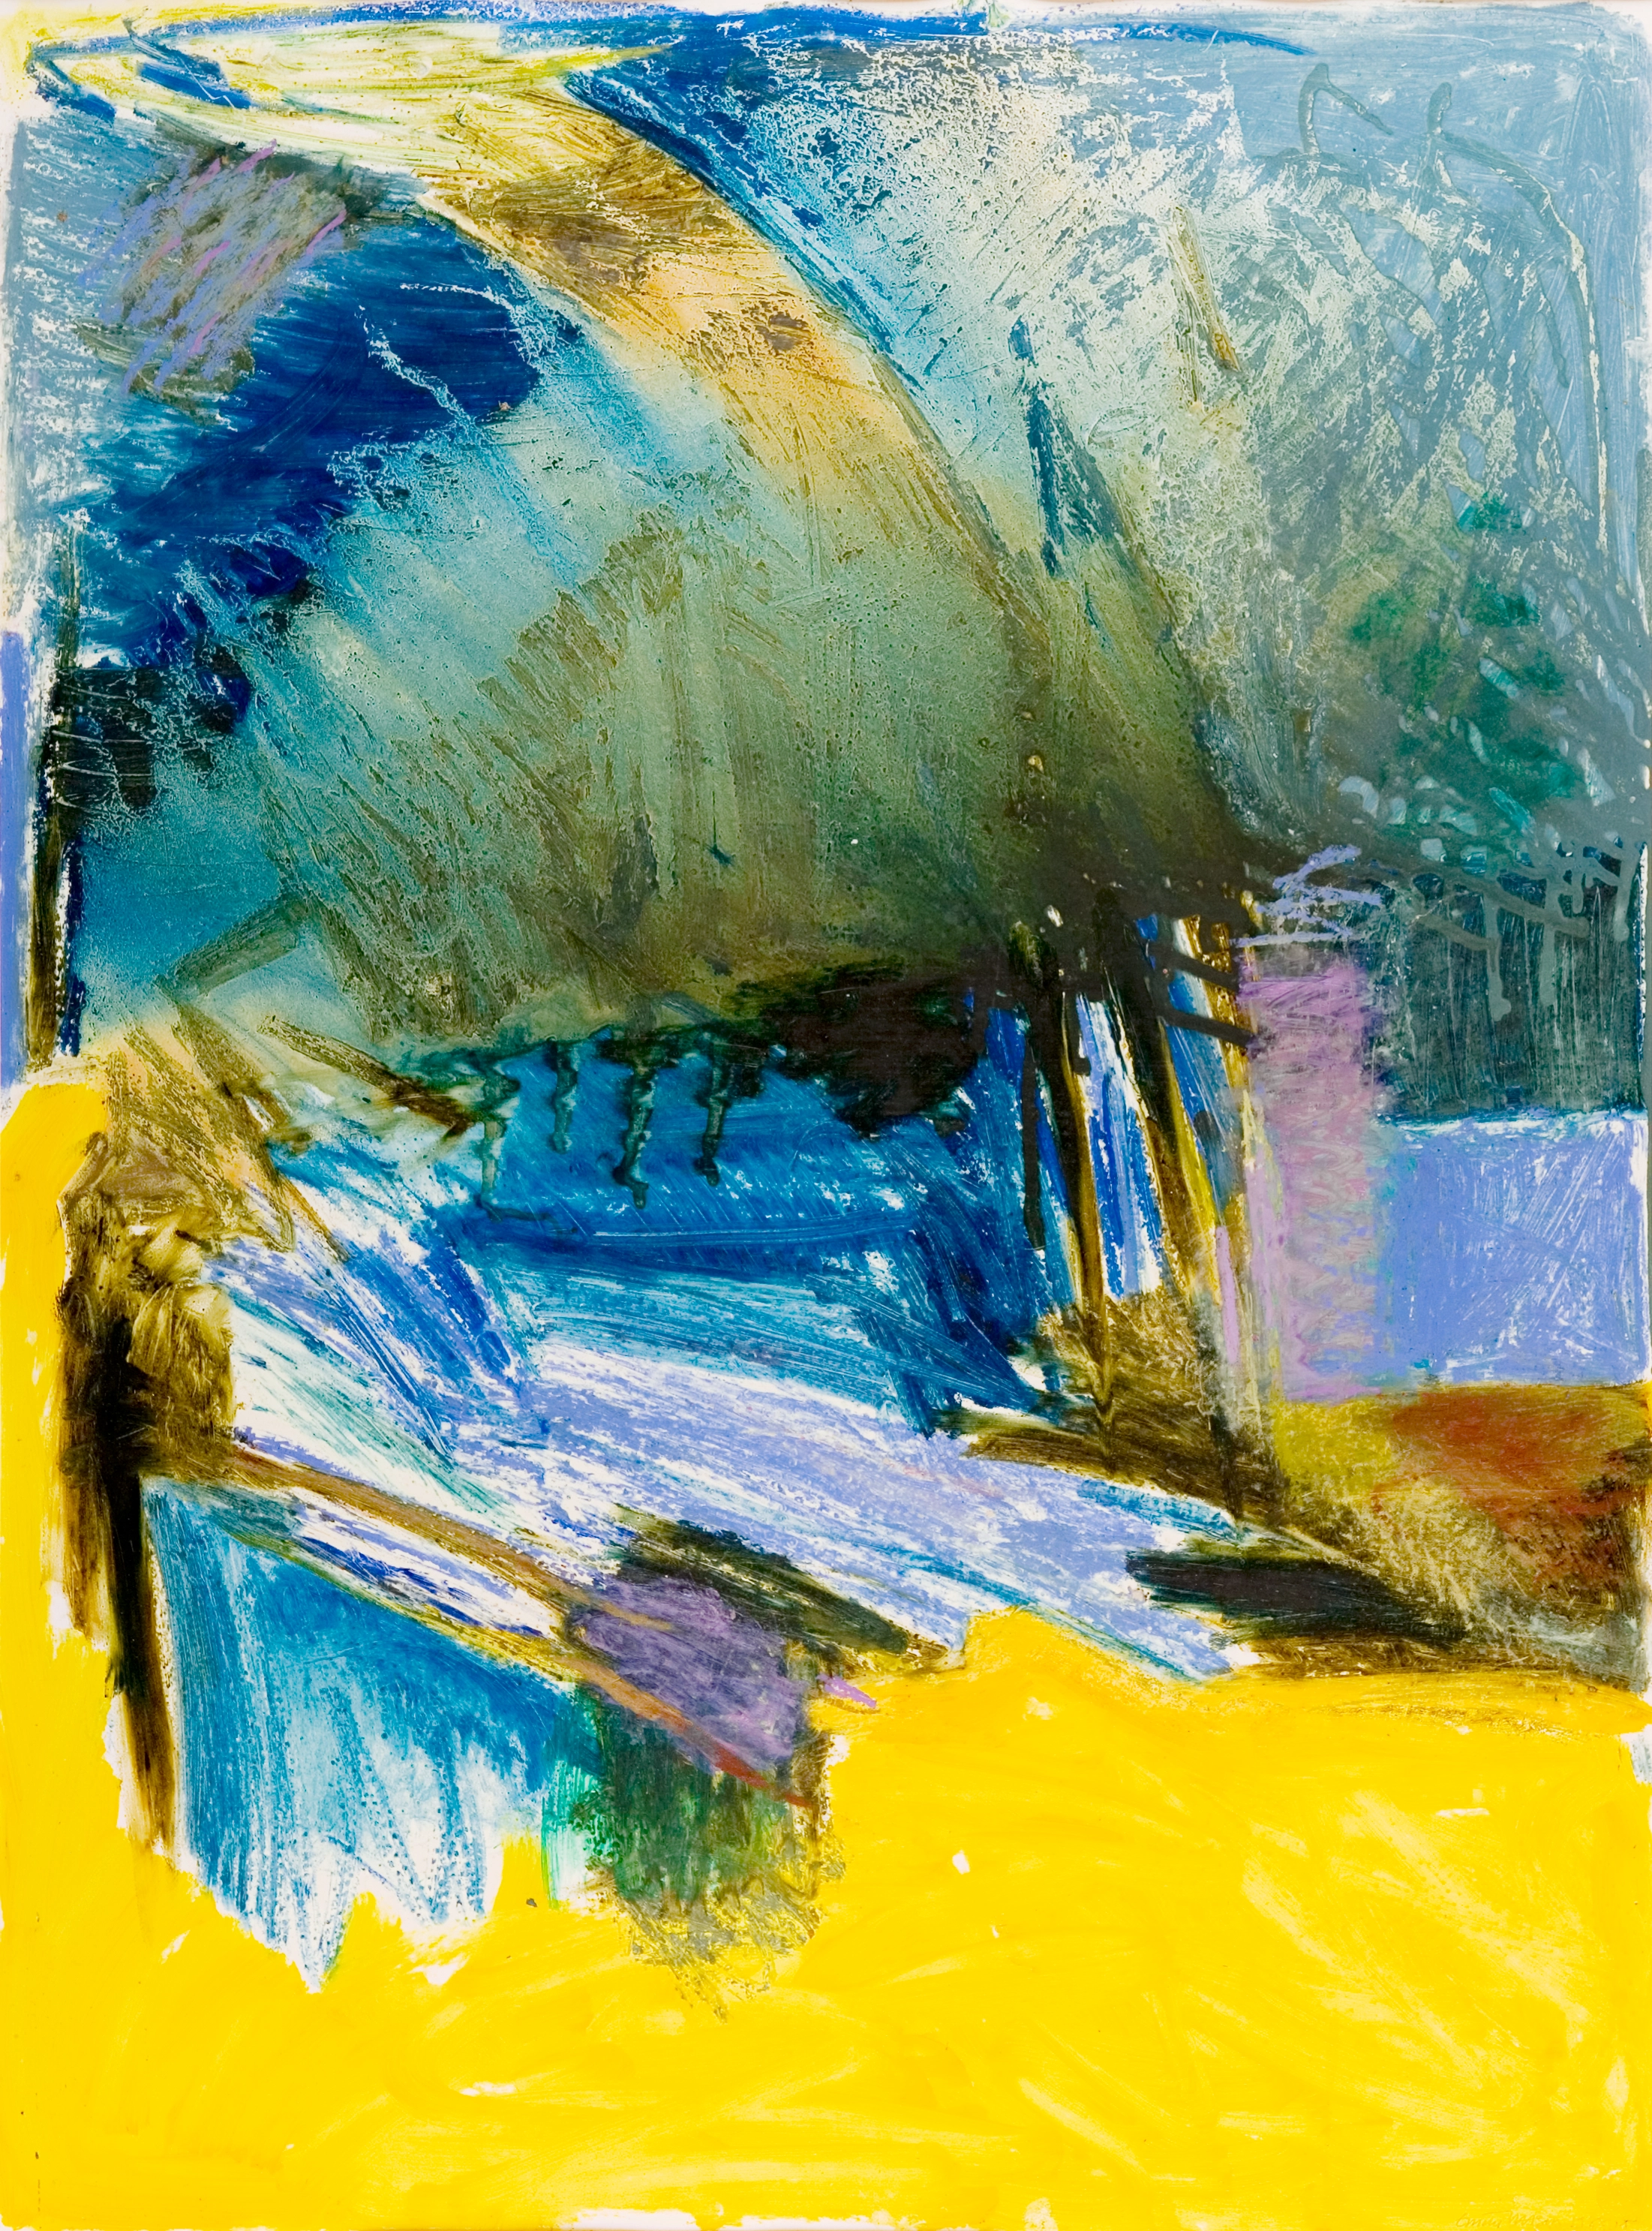 Abstract oil on paper work with energetic gestures of blues, purples, and greens, and a solid yellow area of color on the bottom of the canvas.